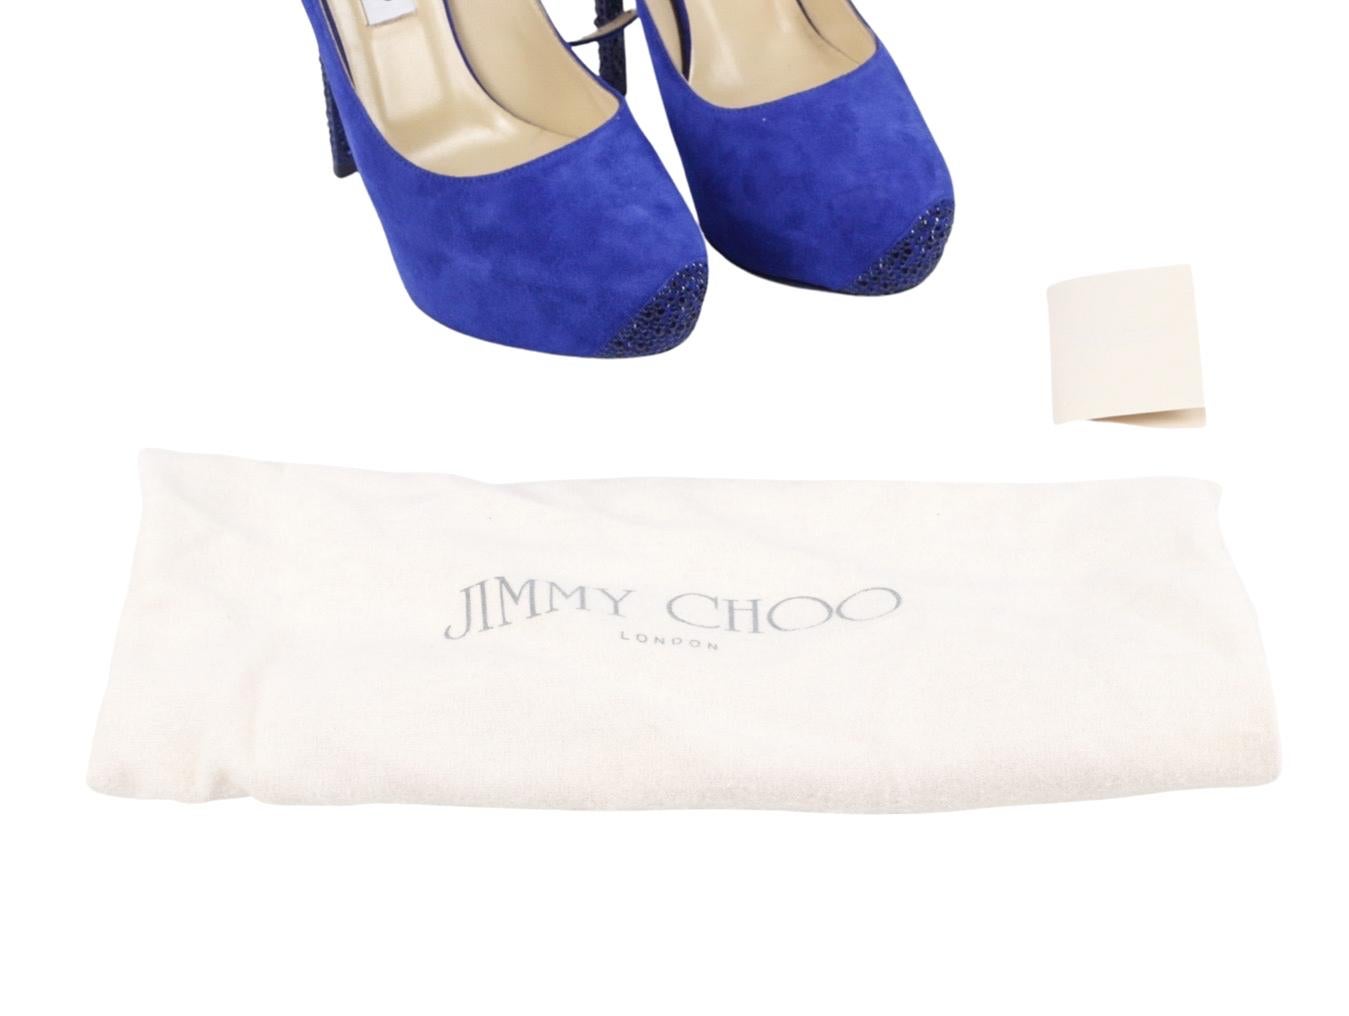 Stunning pair of Jimmy Choo 122 Tame Blue and crystal embellished strappy heels in suede.  Semi round-toe slingback pumps with concealed platforms, crystal embellishments throughout and gold-tone buckle closures at ankles. These are a size 38.5 (UK